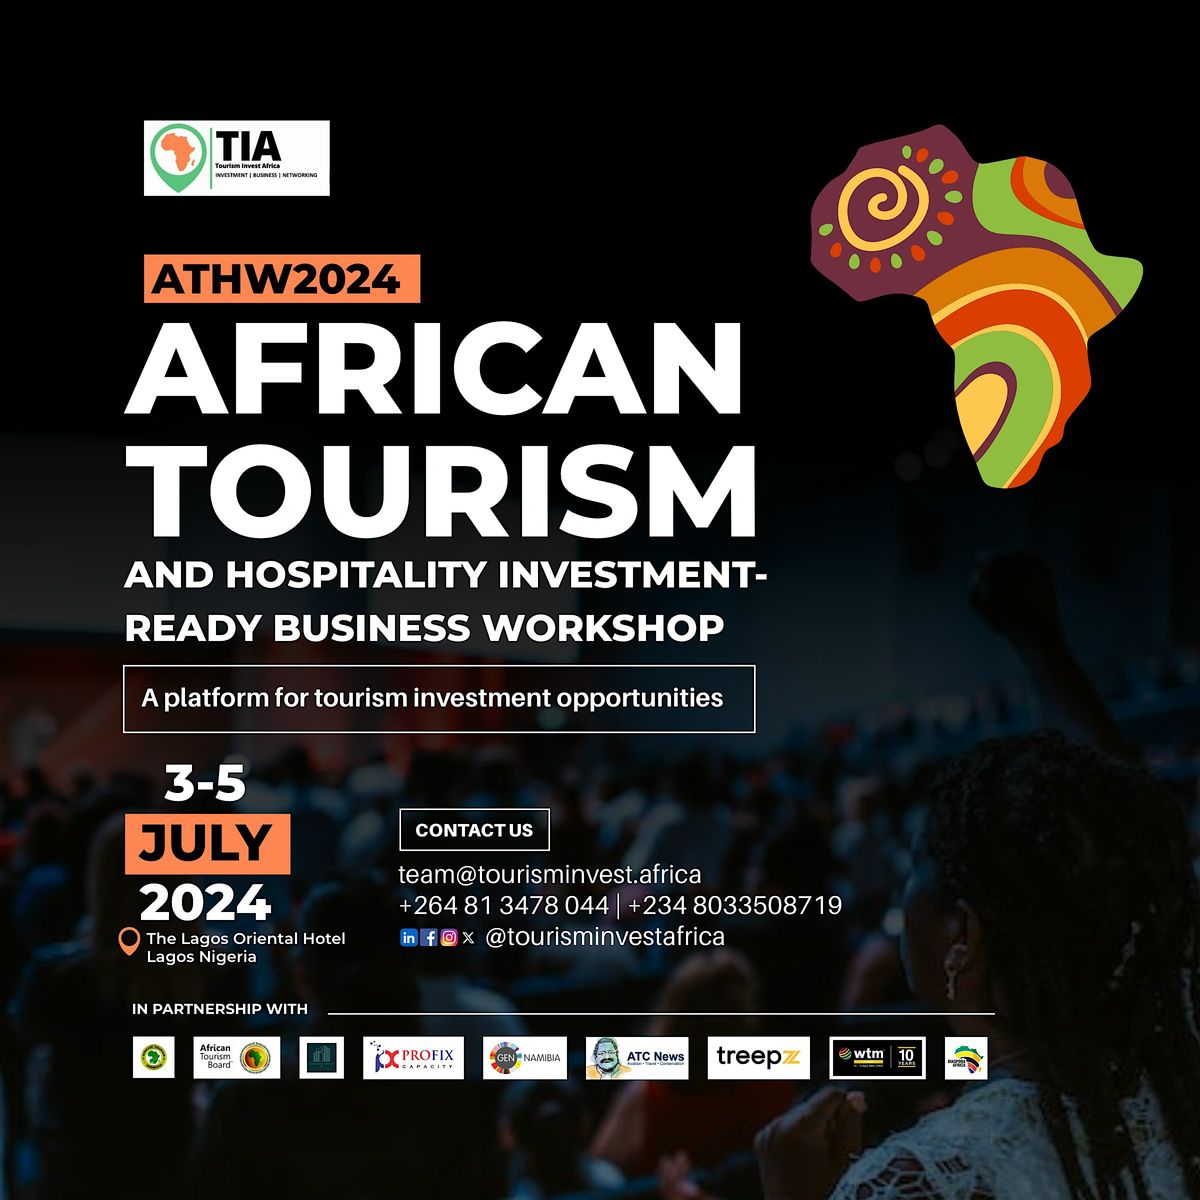 African Tourism and Hospitality Investment-Ready Business Workshop ATHW2024